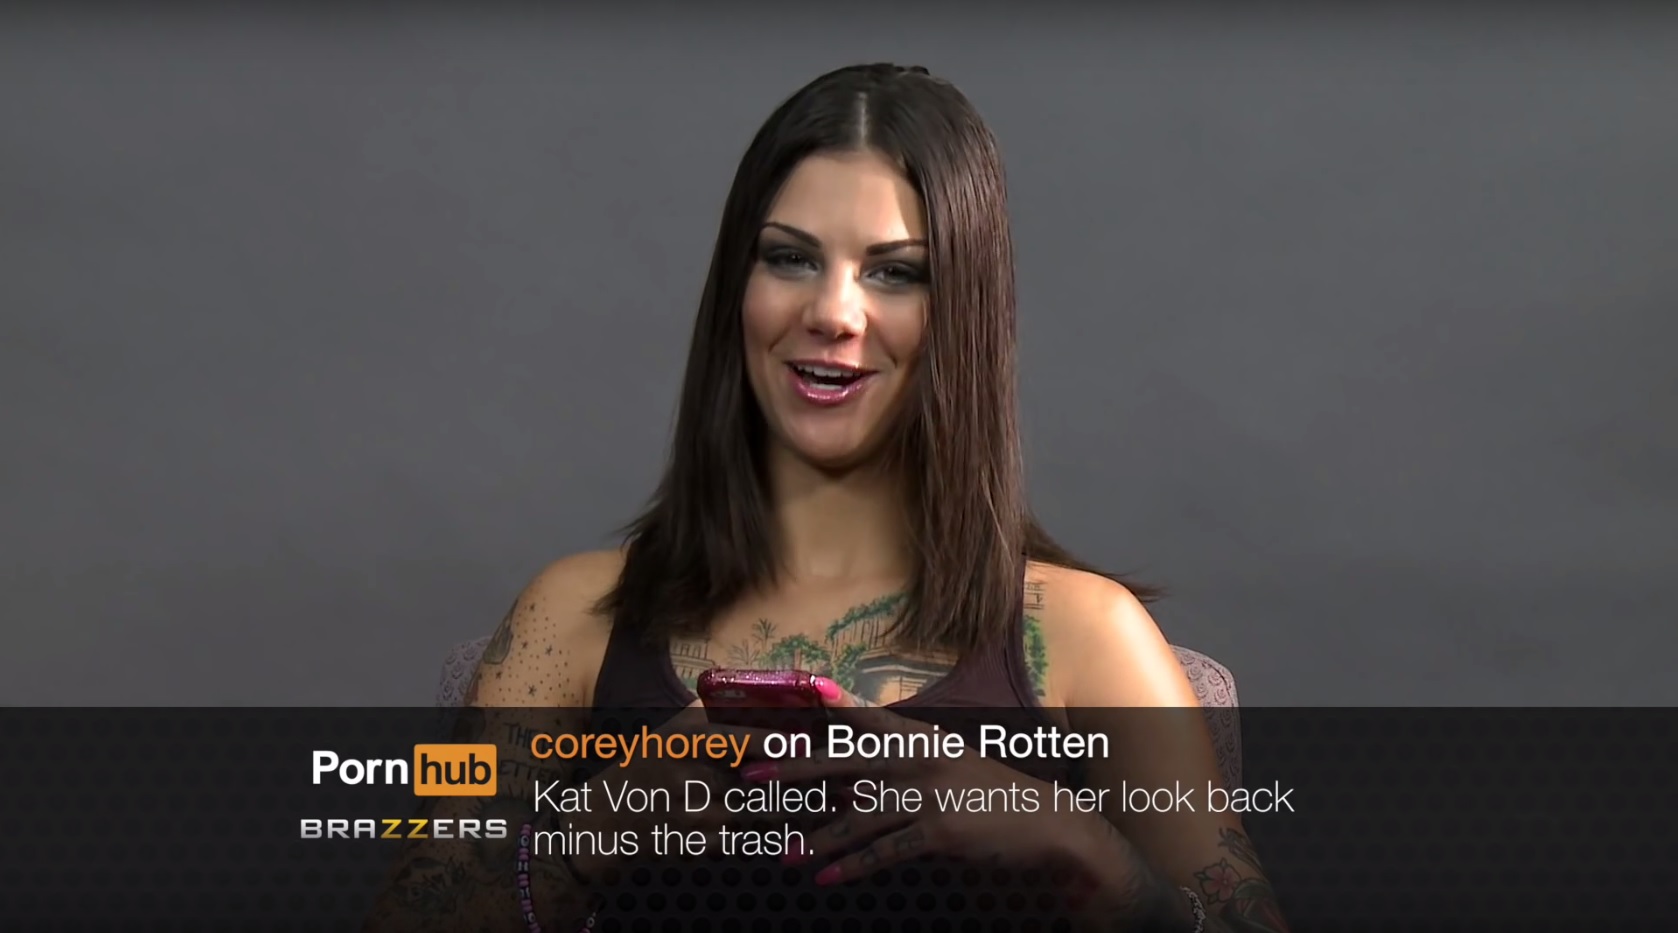 memes - beauty - Gie Pornhub coreyhorey on Bonnie Rotten Kat Von D called. She wants her look back Brazzers minus the trash.